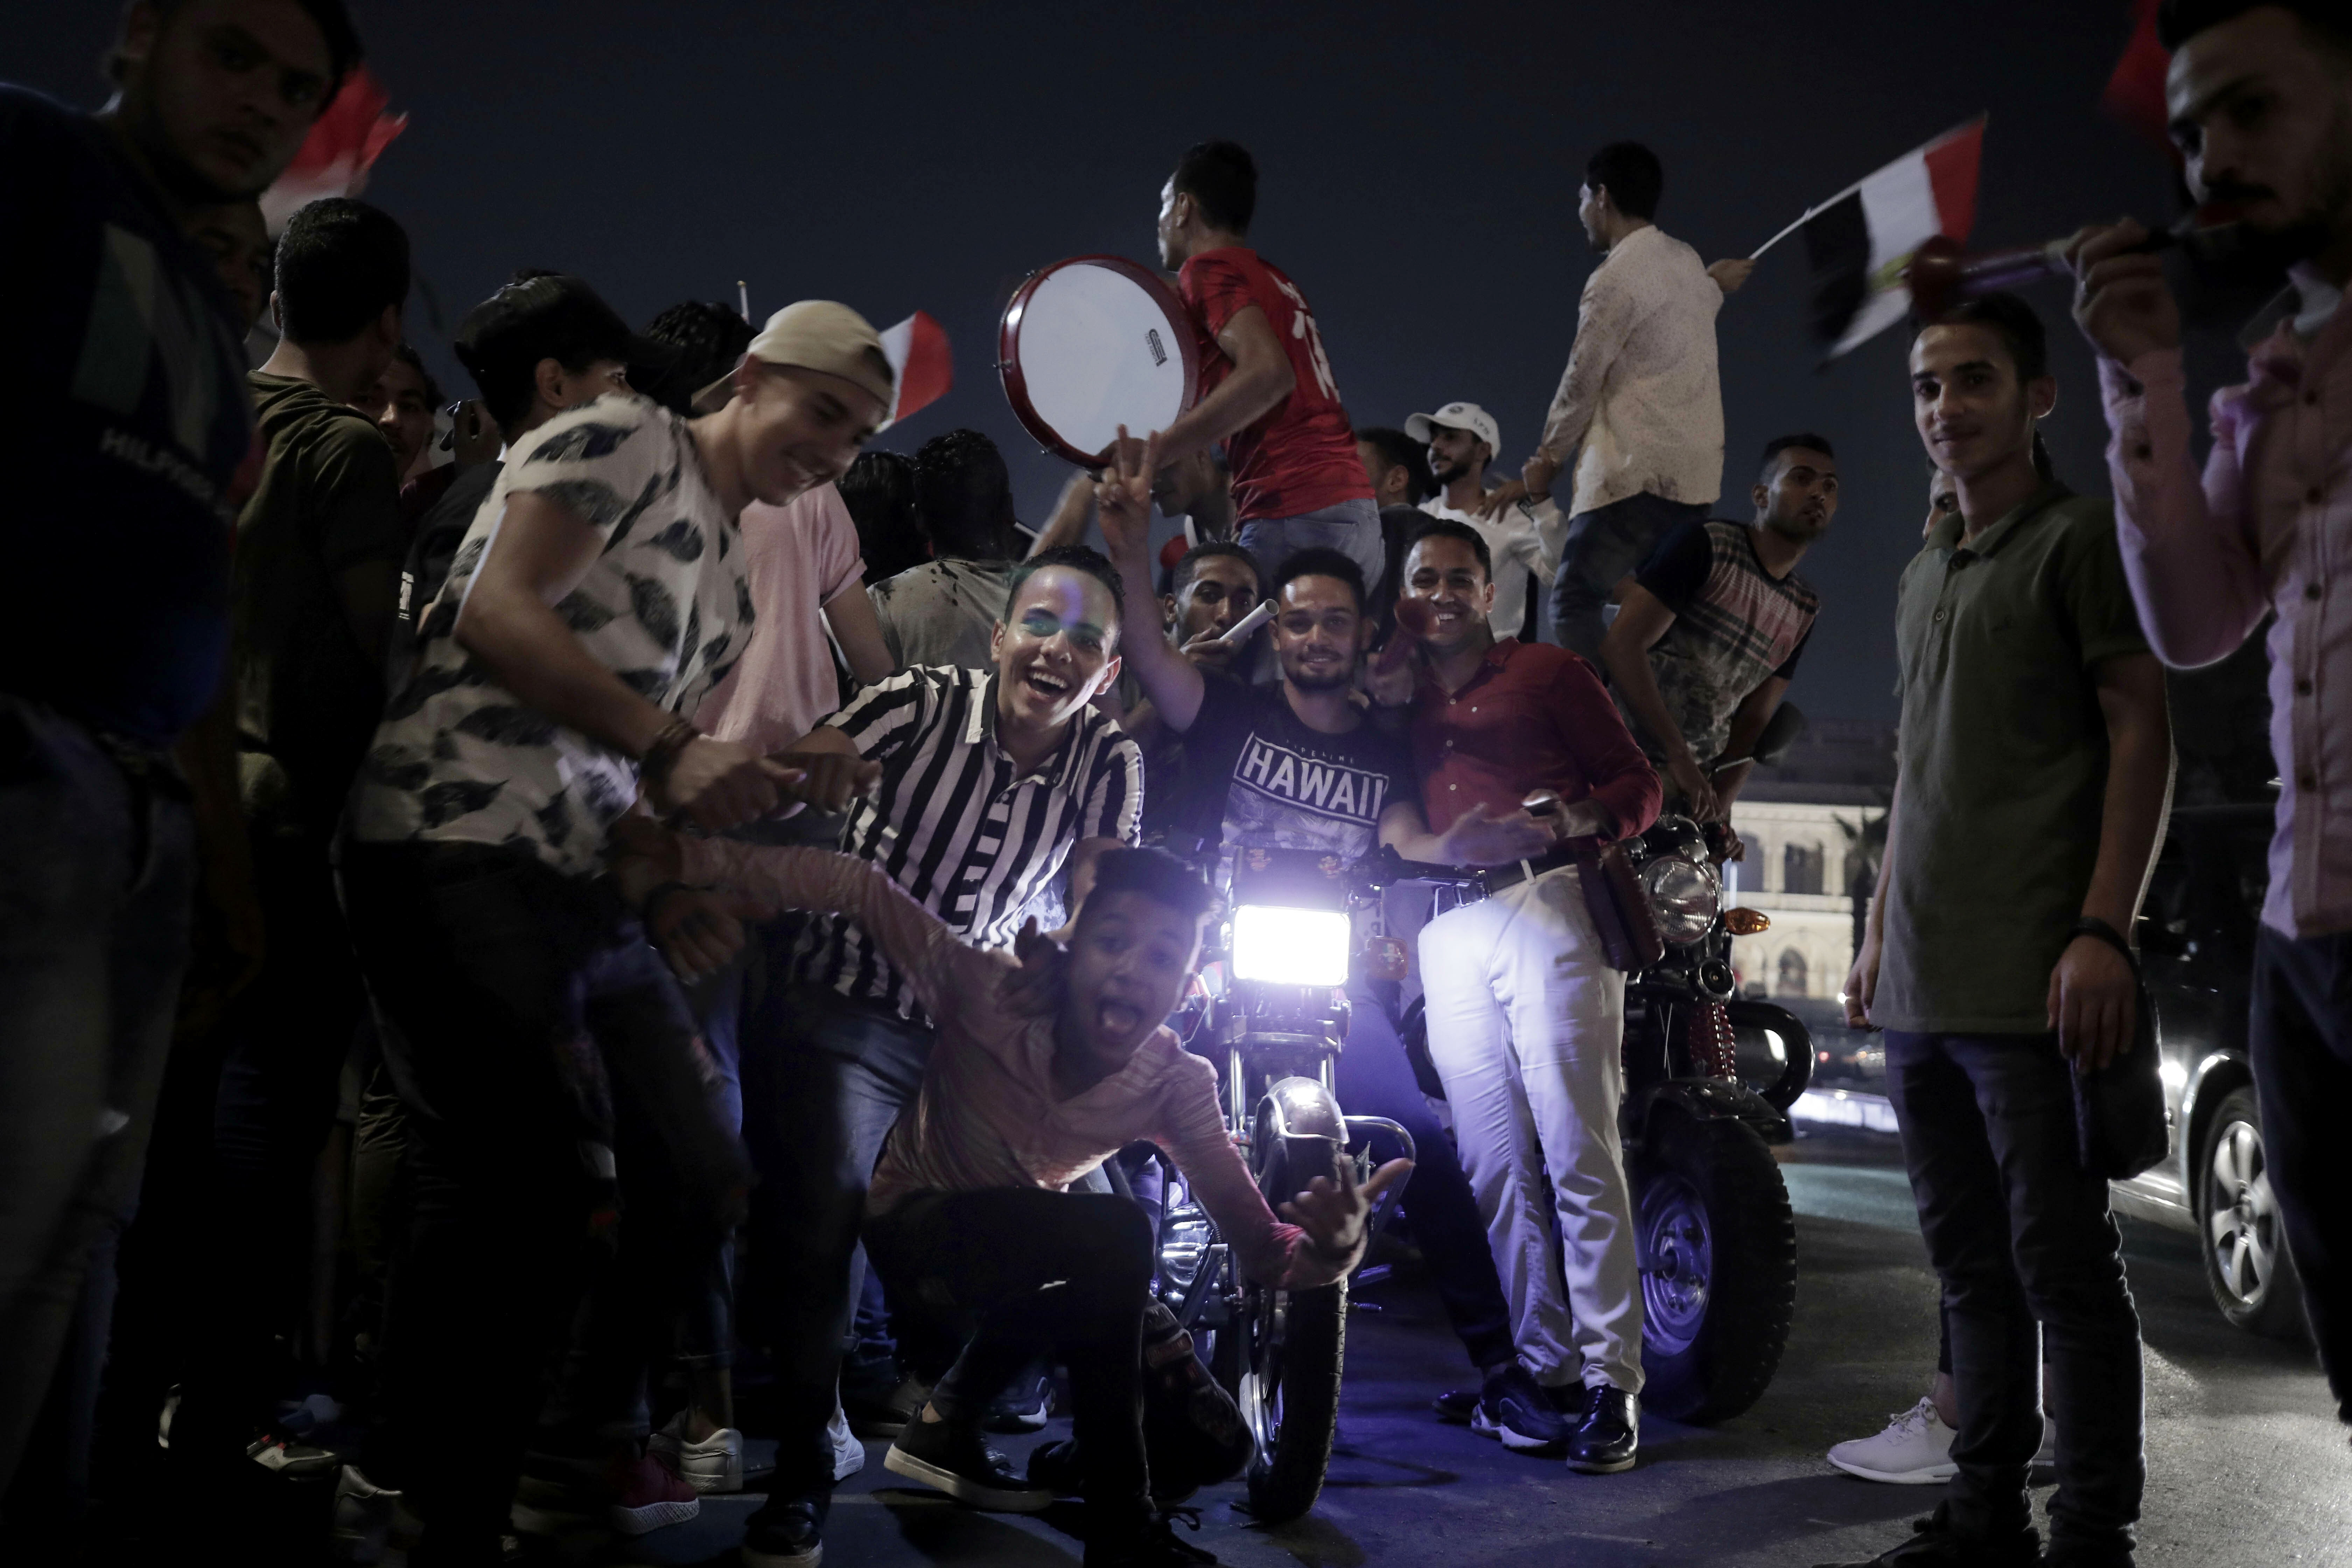 Egyptian soccer fans celebrate after their team won against Zimbabwe during the Africa Cup of Nations, on a street in Cairo, Egypt, Friday, June 21, 2019. (AP Photo/Nariman El-Mofty)